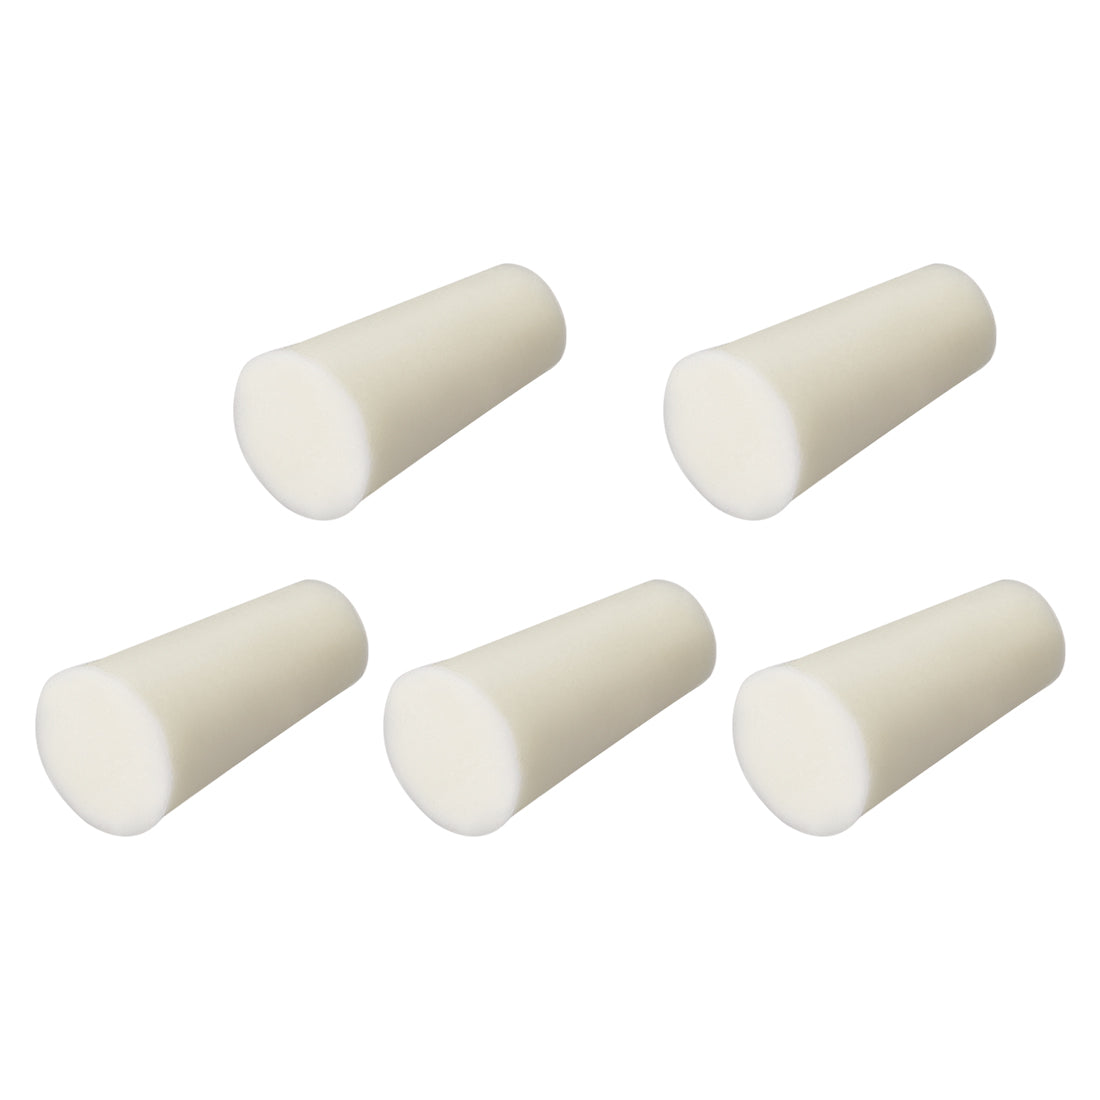 uxcell Uxcell 8-12mm Beige Drilled Silicone Stopper Plugs for Flask Test Tube Stopper 5pcs